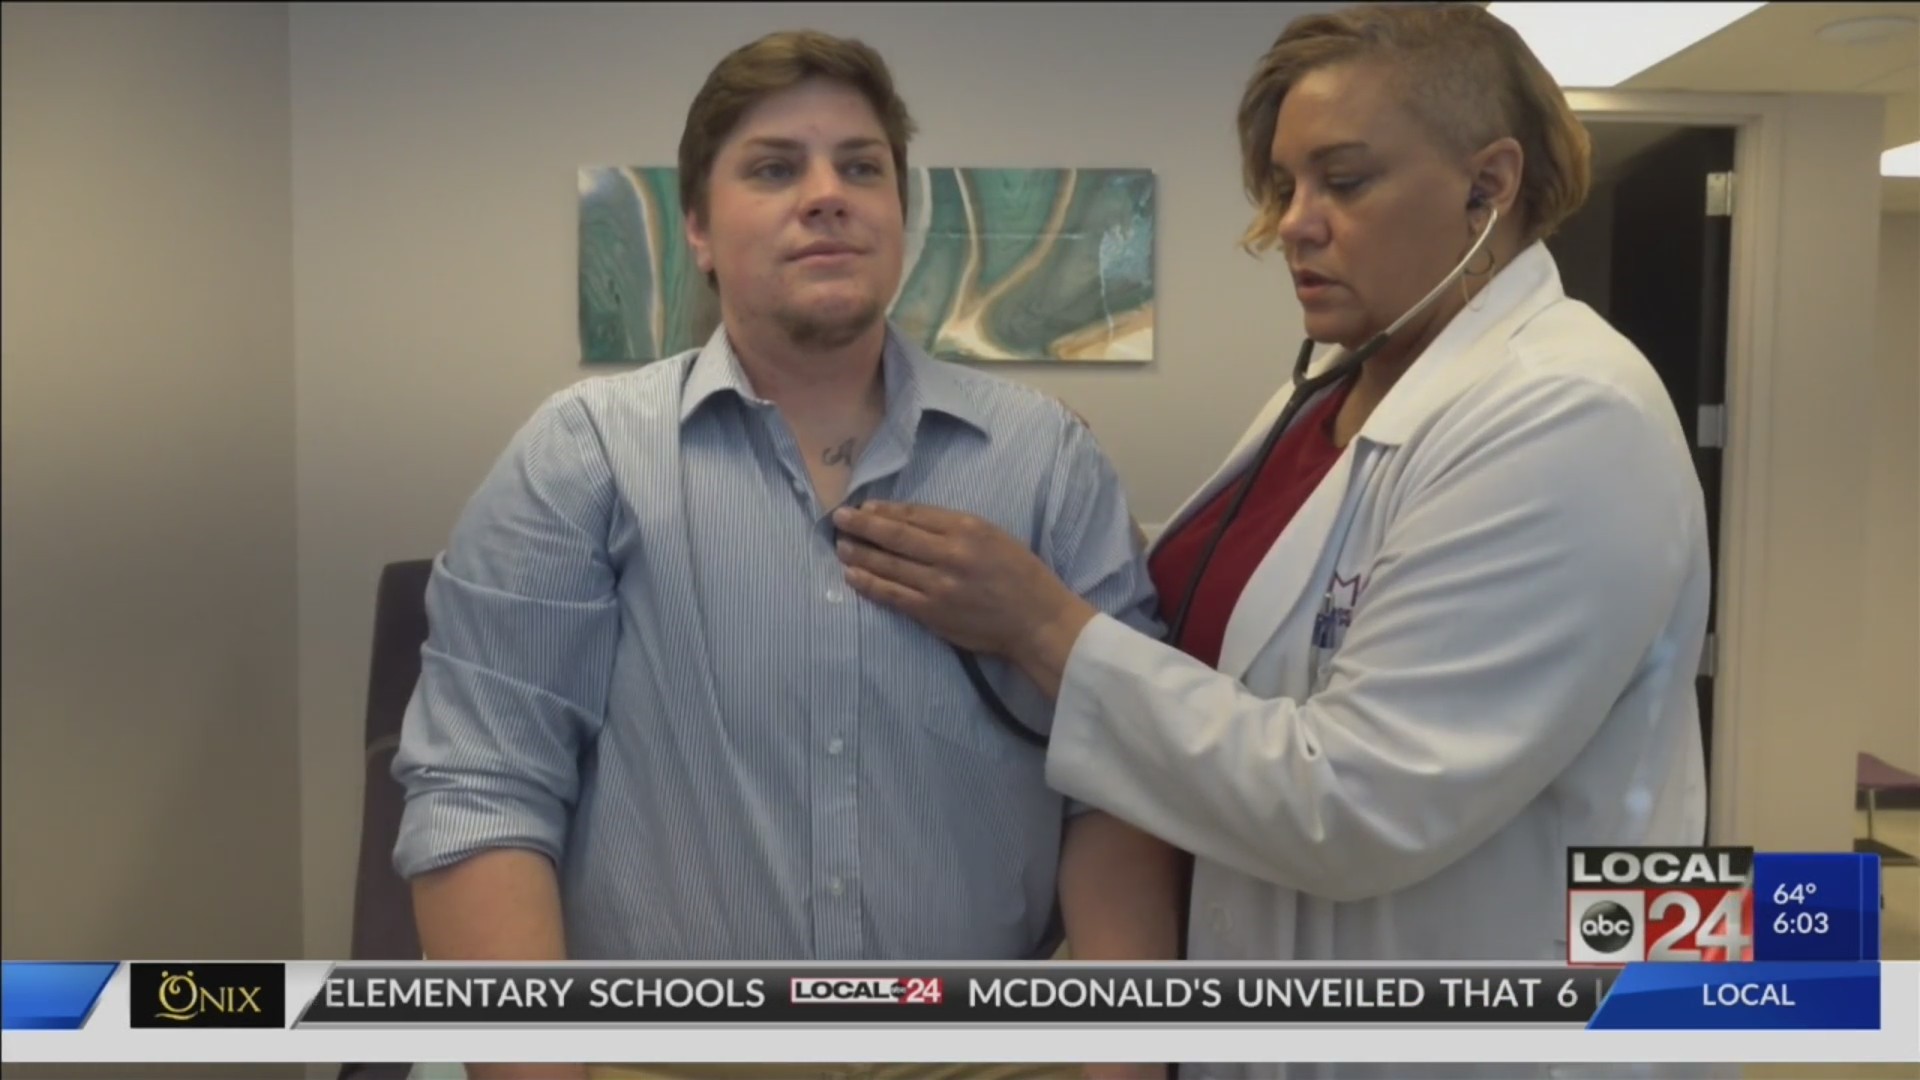 Local doctor works to help transgender patients